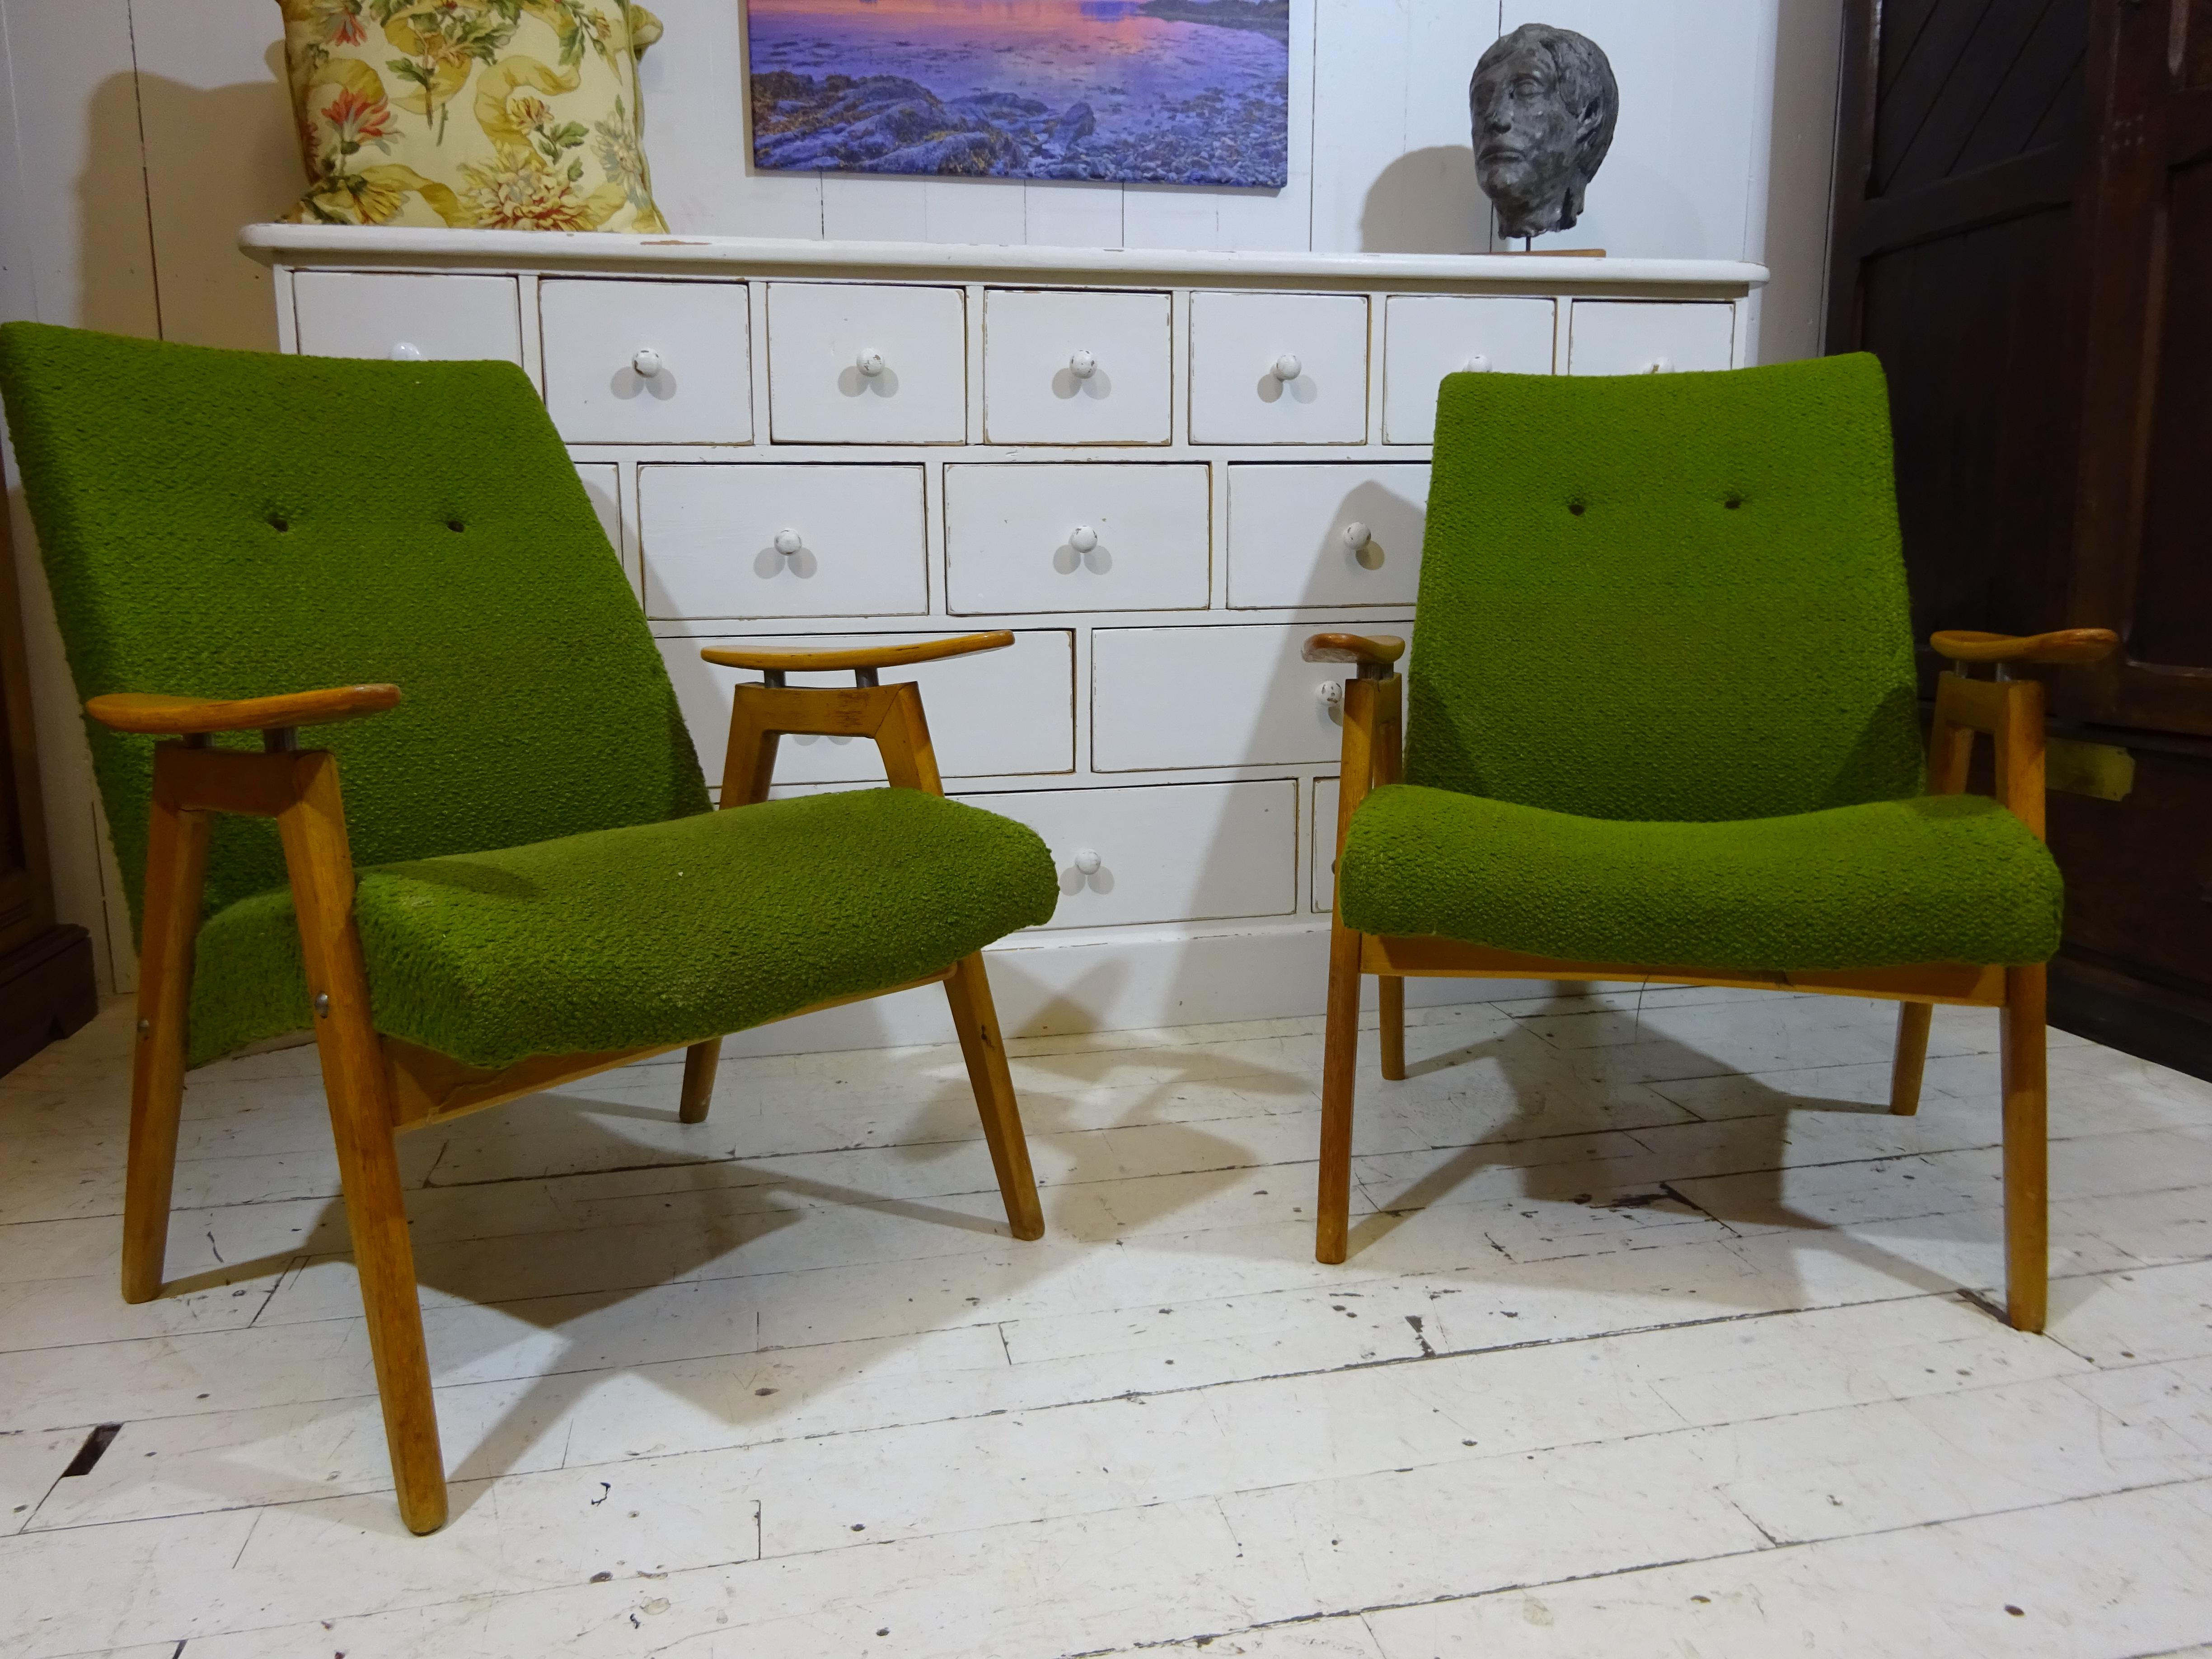 Lounge Chair
Great shape and design on these stunning lounge chairs created by Smidek circa Mid 1960s. Teak and beech frame is solid and has lovely proportions allowing use in a smaller room yet still providing a fabulous look.
These beautifully